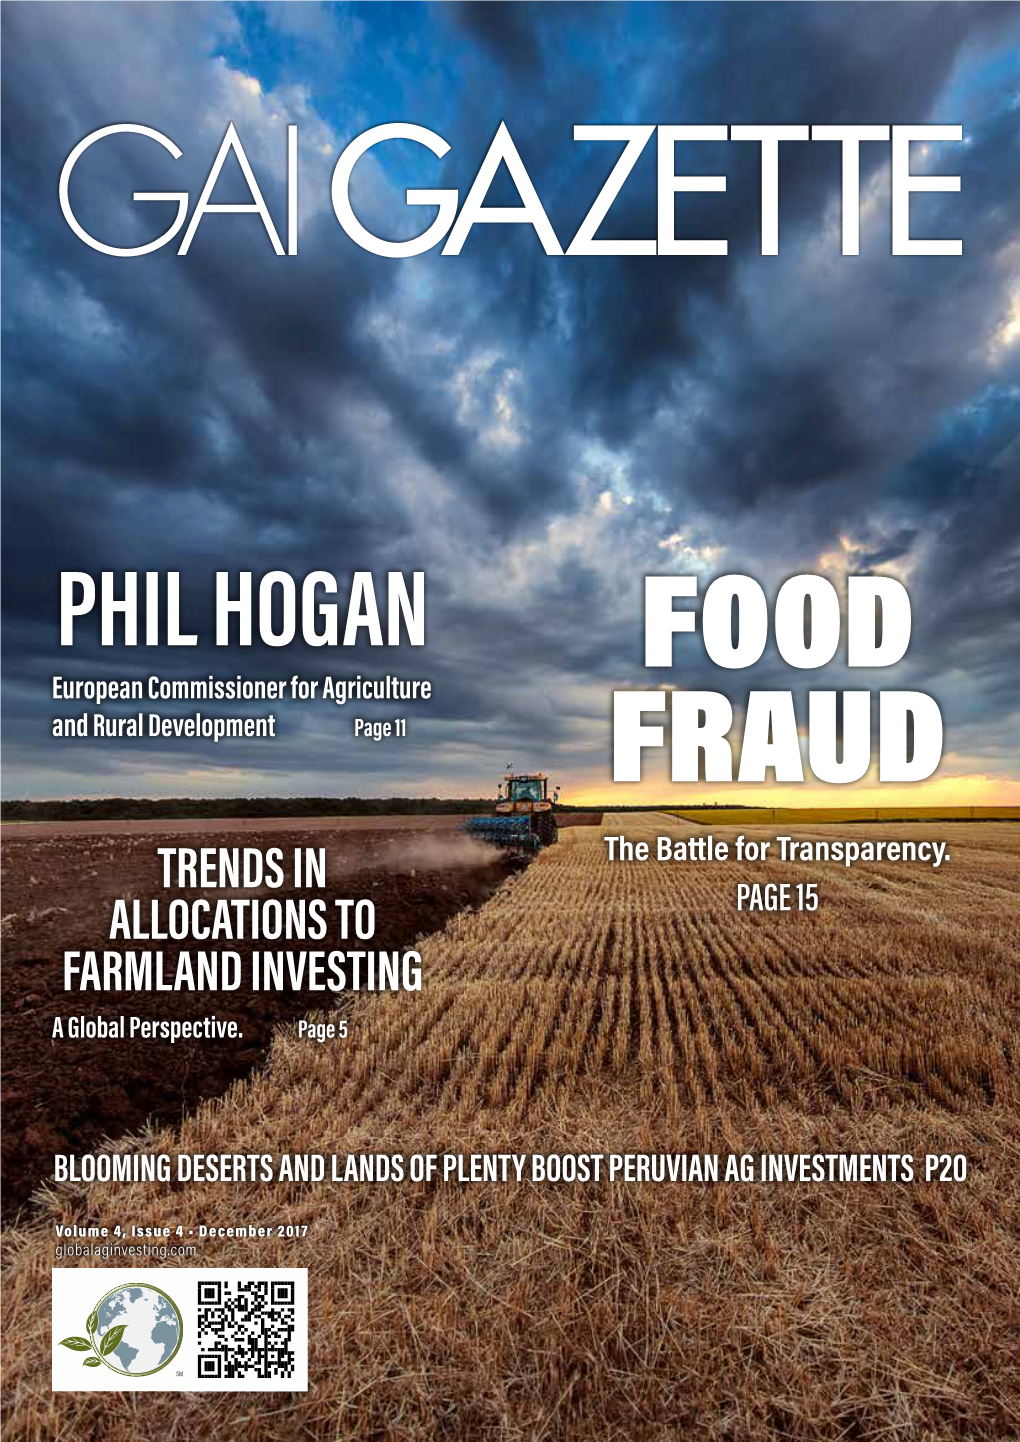 PHIL HOGAN FOOD European Commissioner for Agriculture and Rural Development Page 11 FRAUD TRENDS in the Battle for Transparency